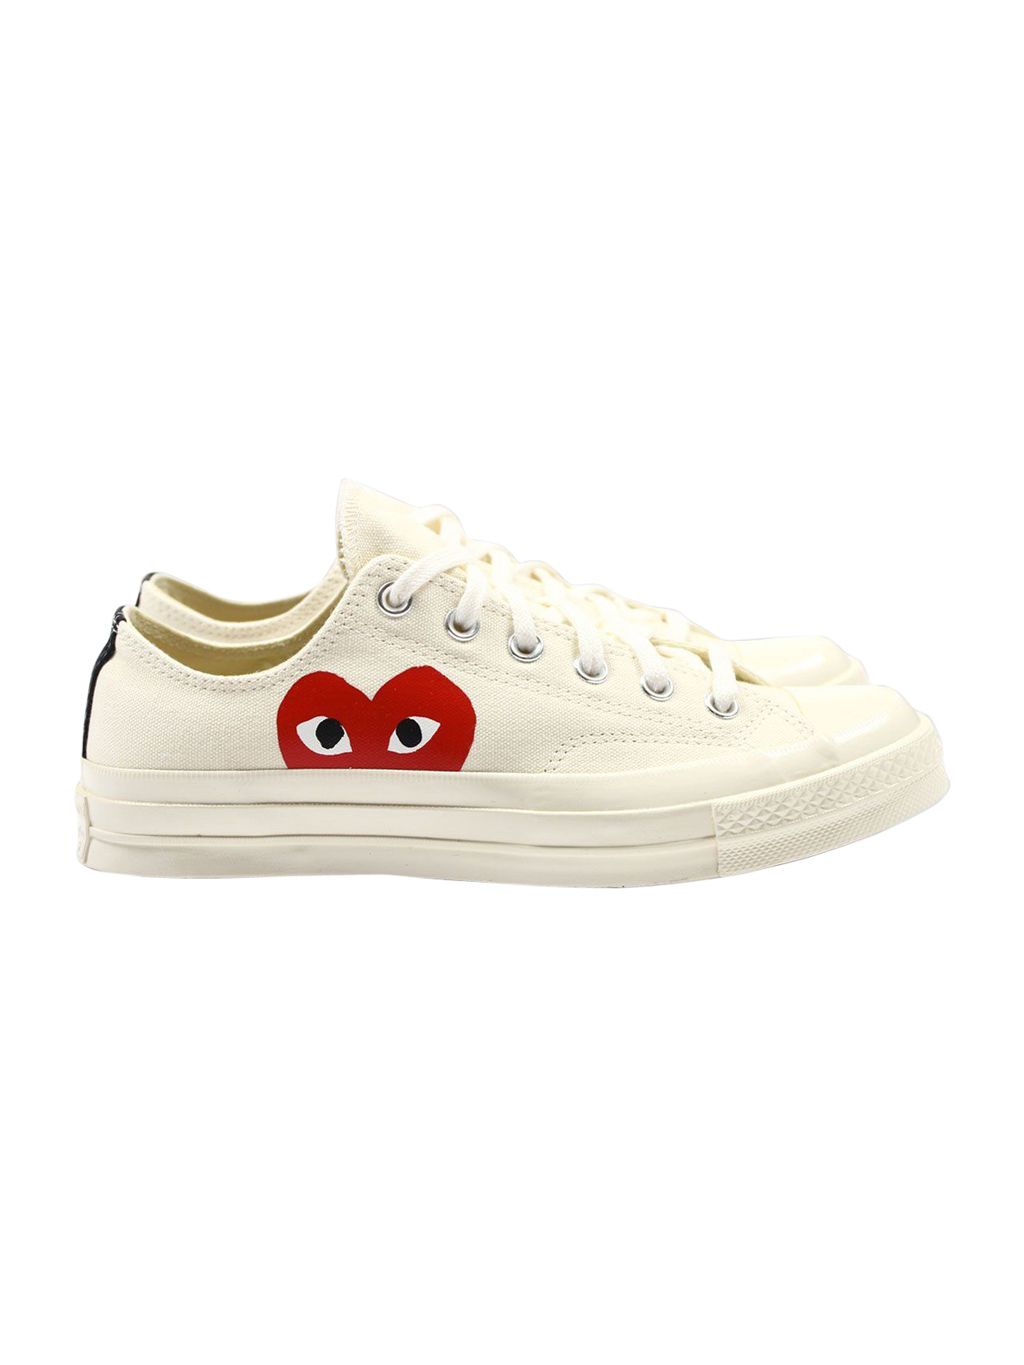 converse shoes red heart